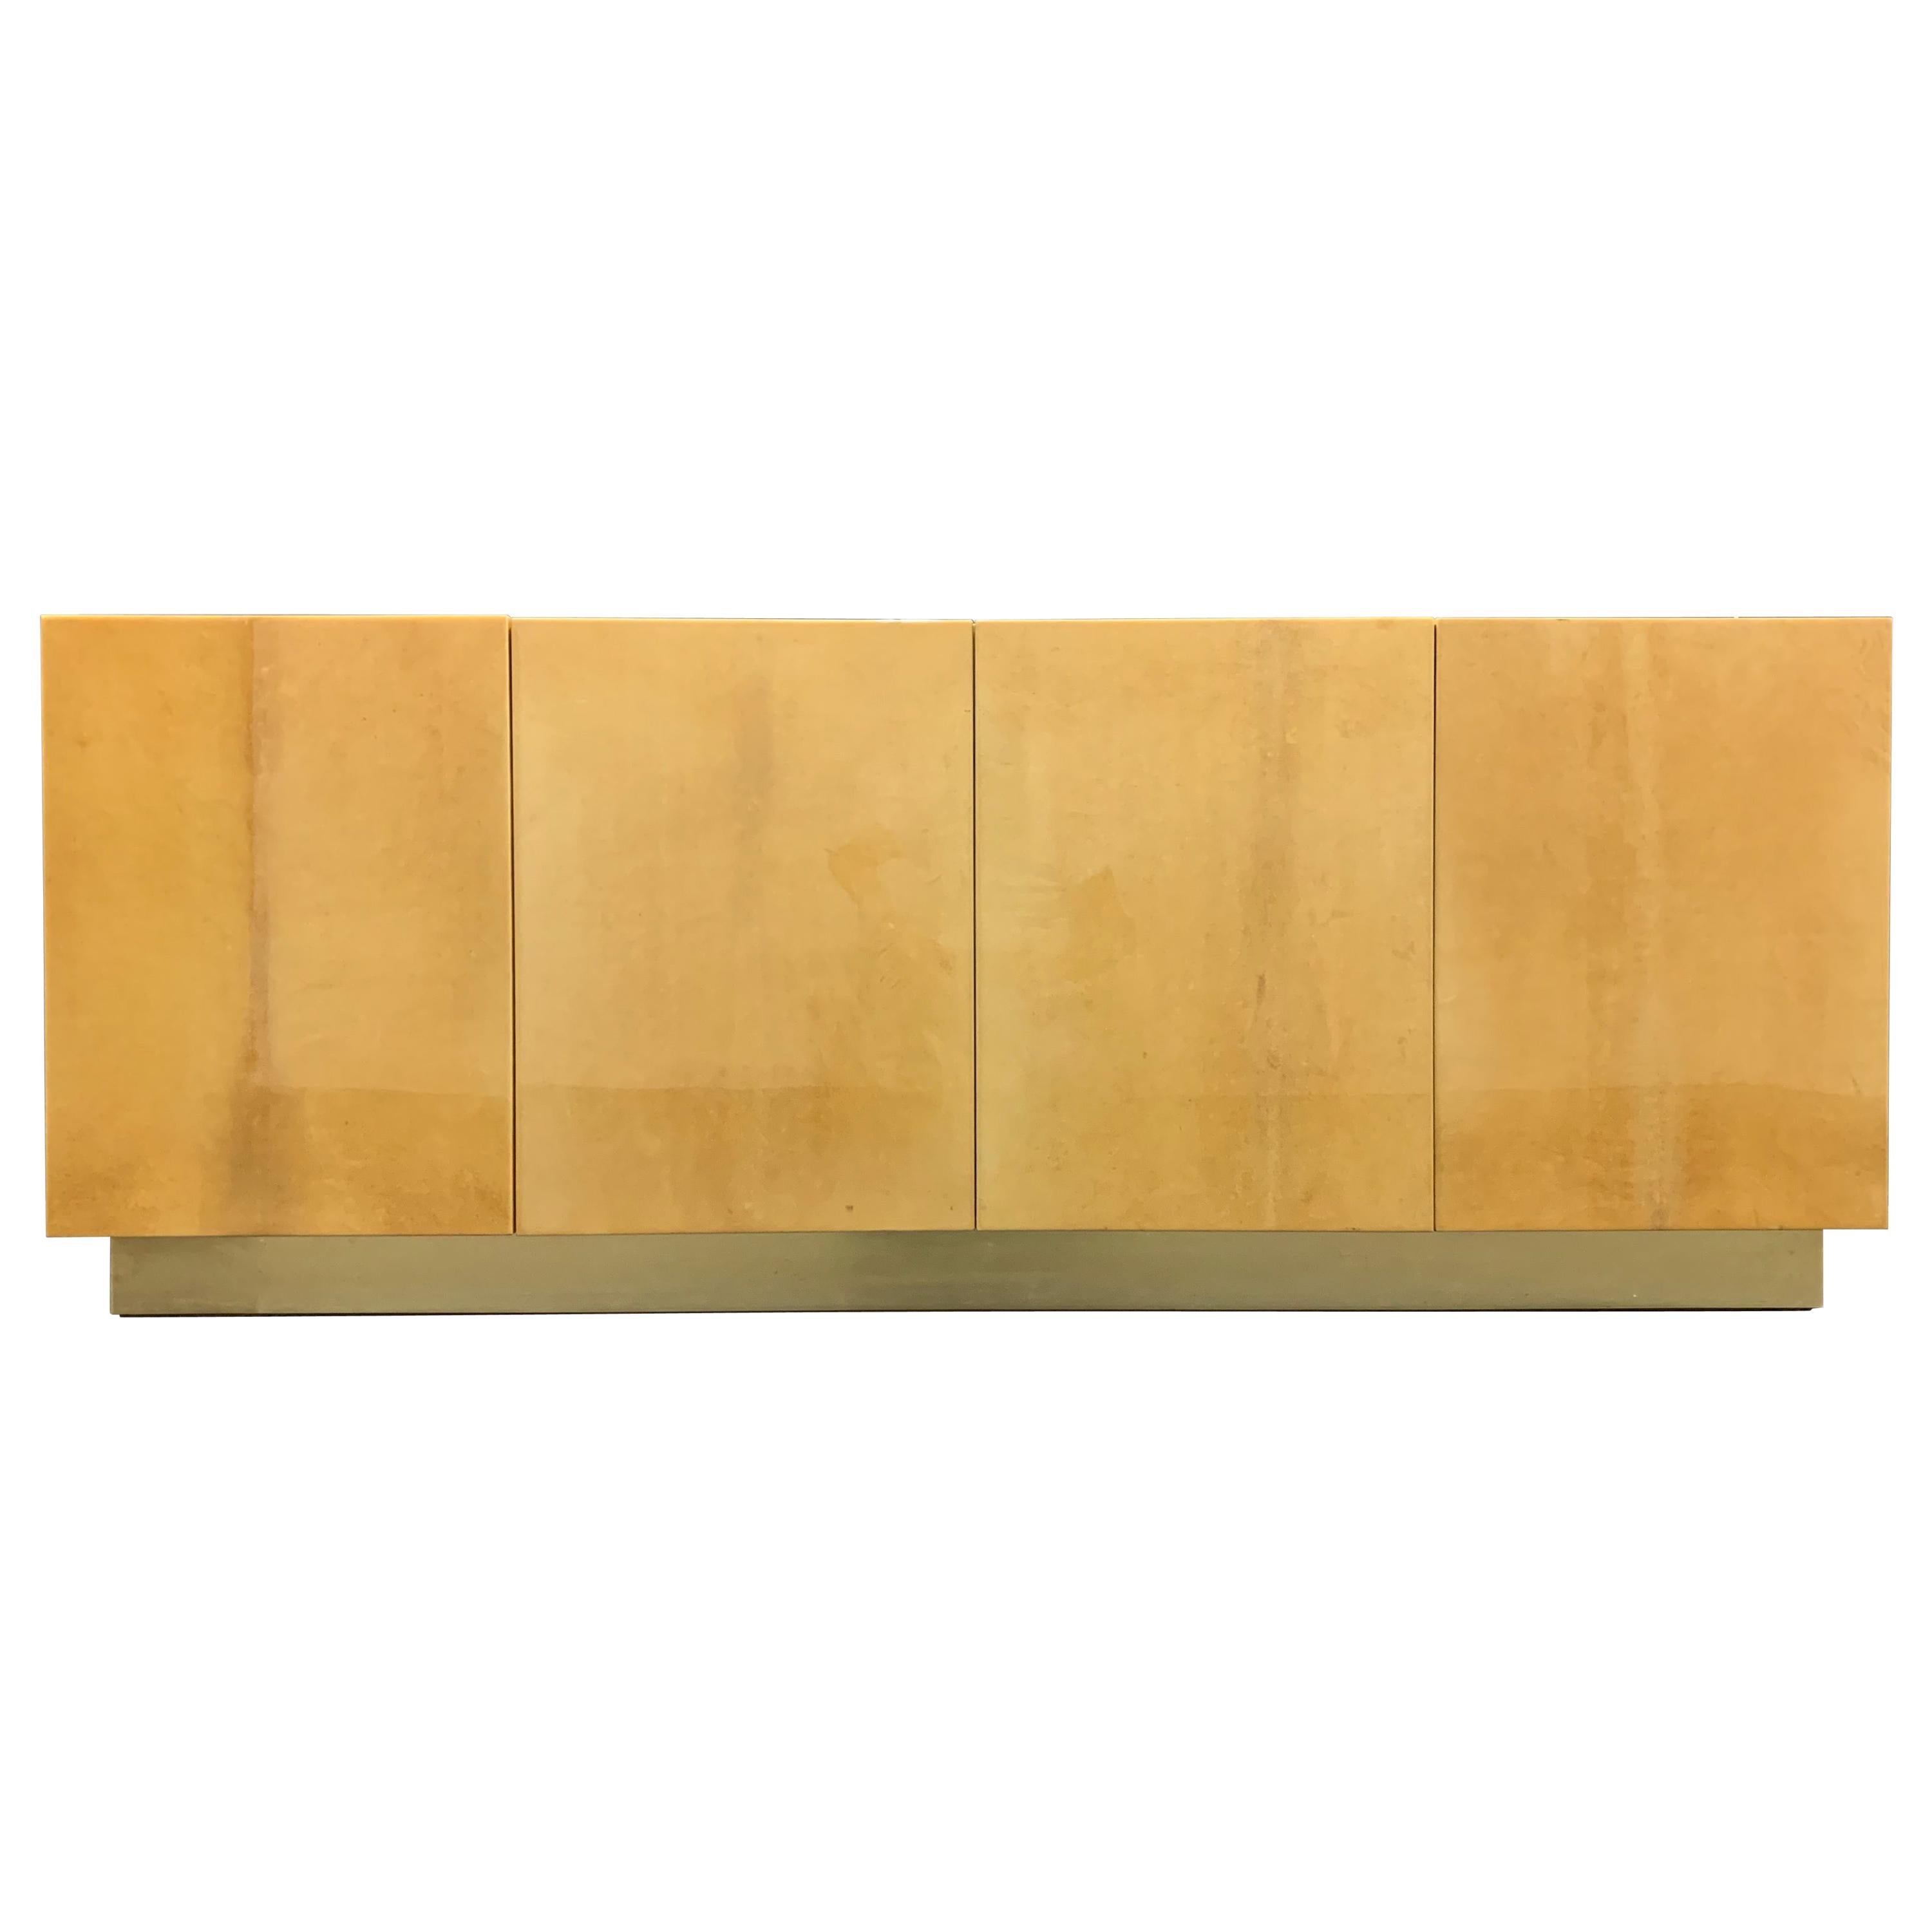 Breathtaking Aldo Tura Sideboard or Room Divider with Real Back For Sale